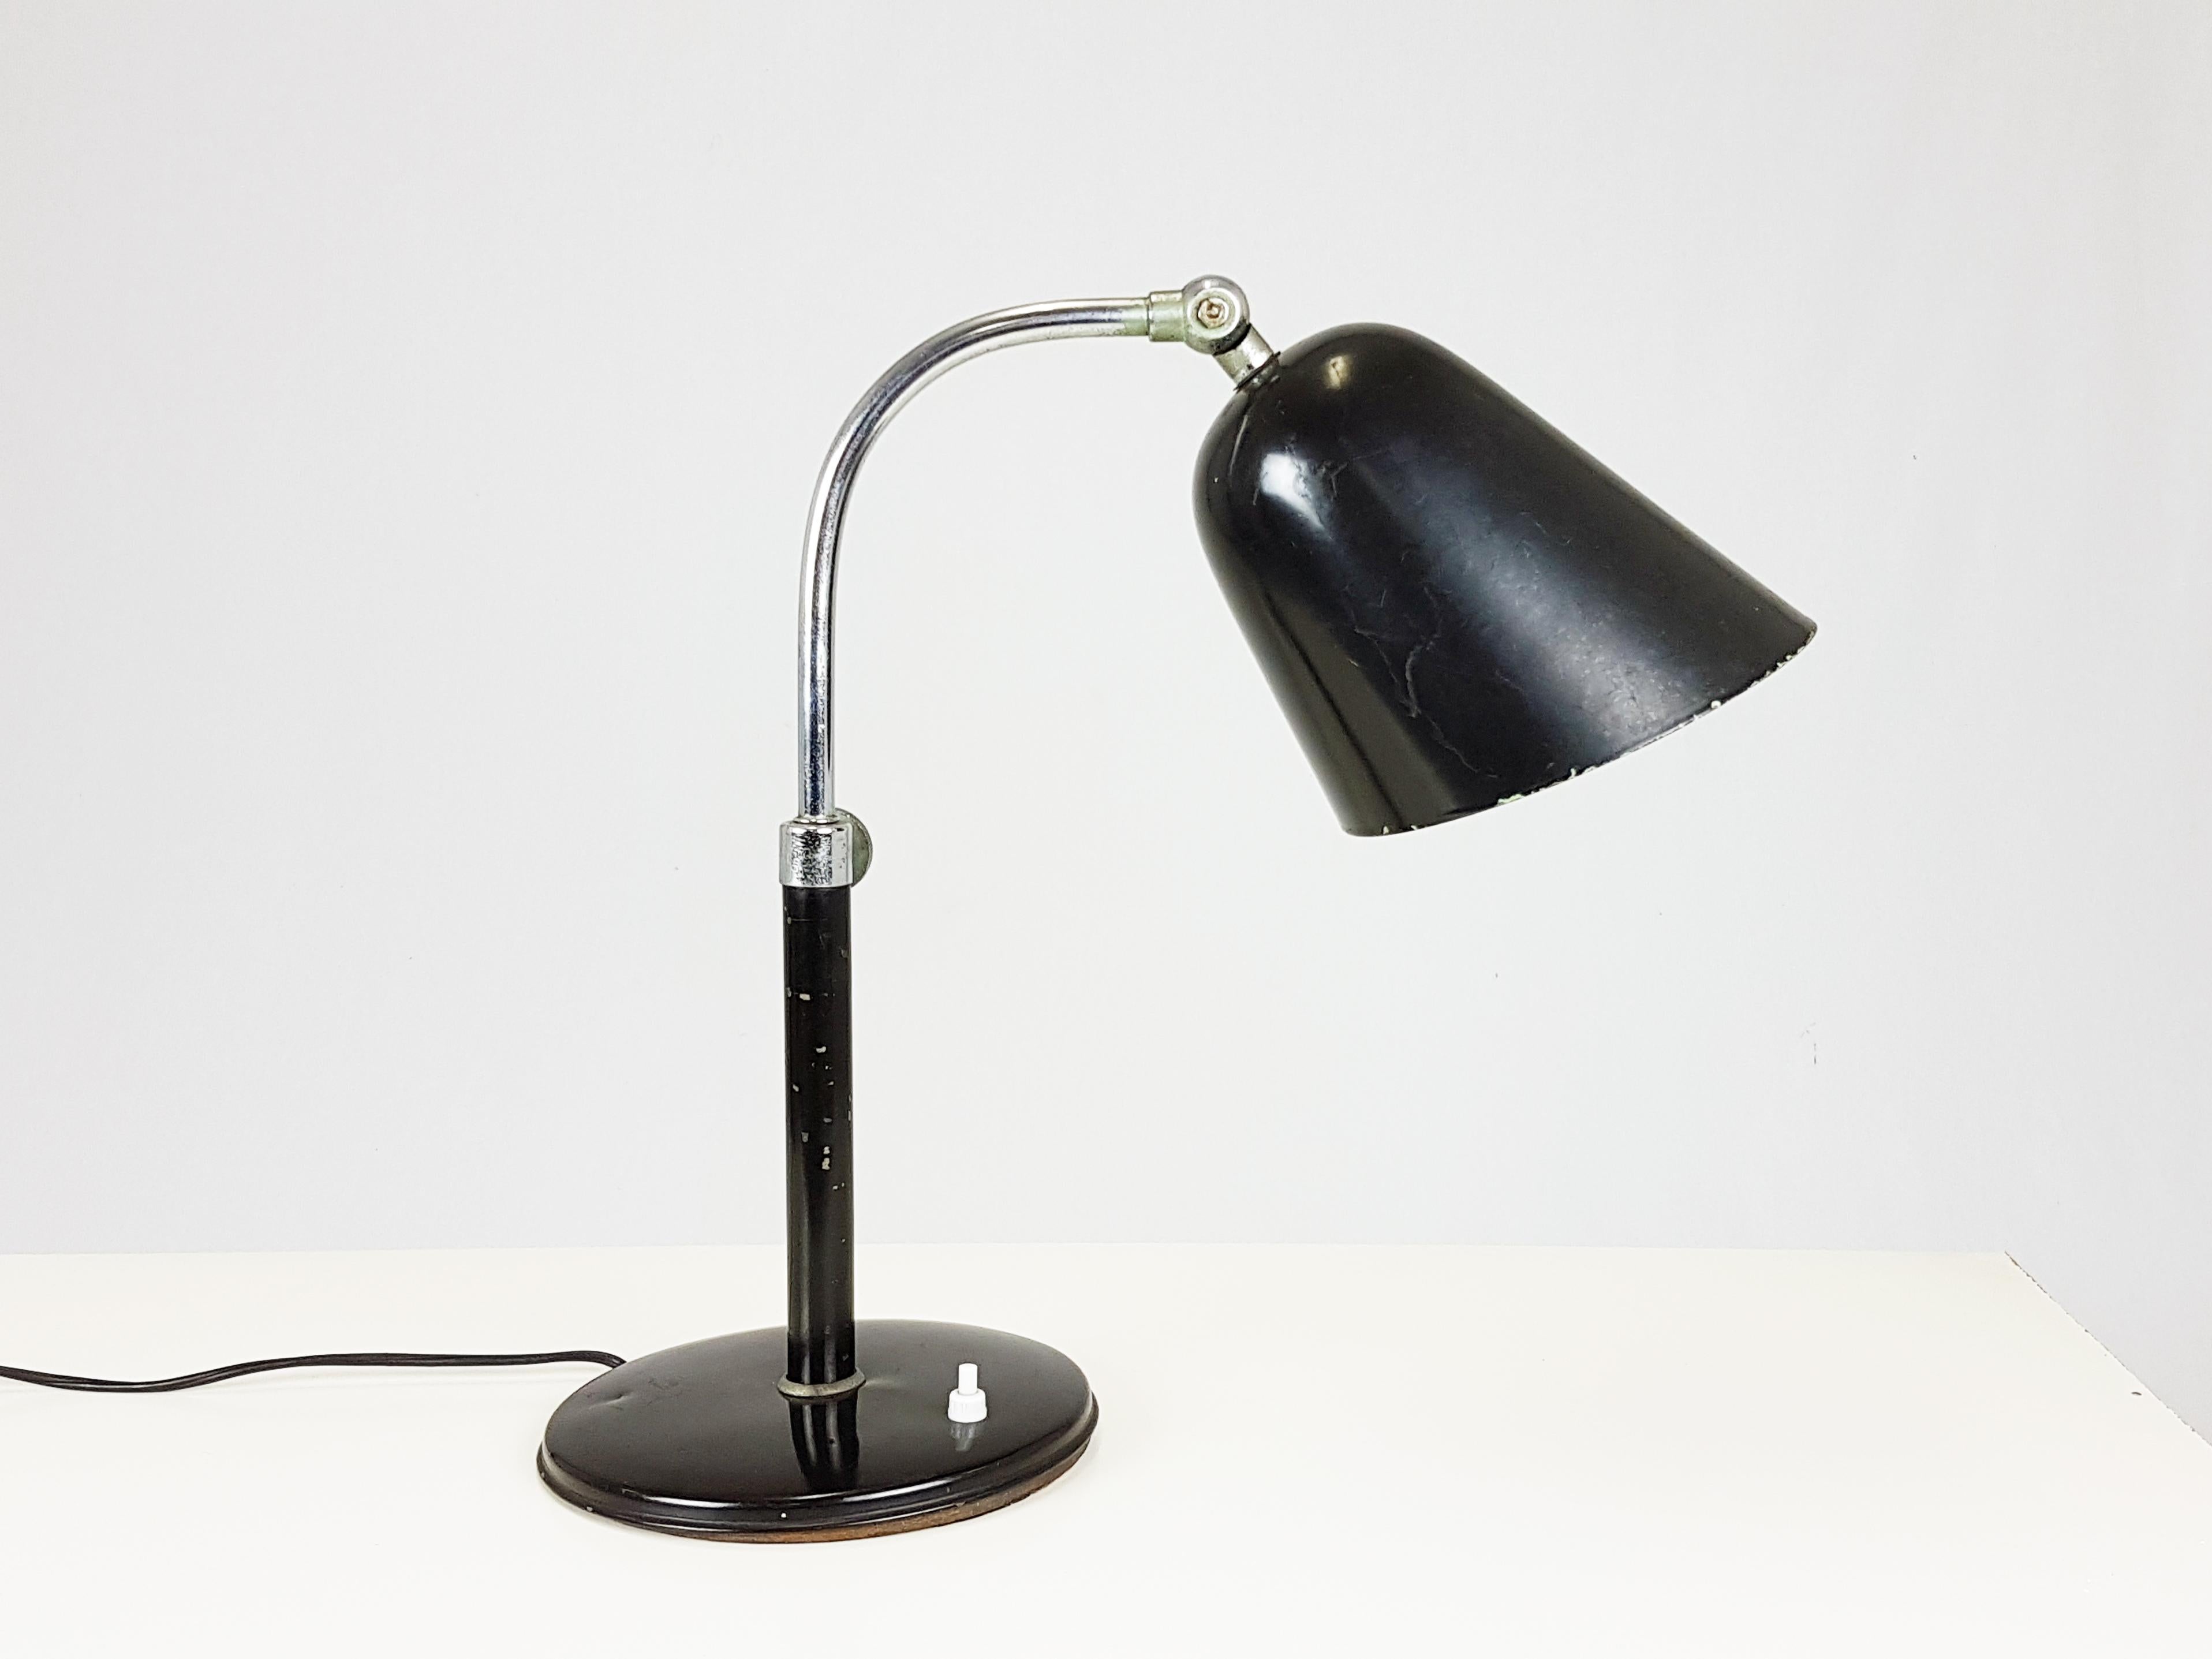 Rare Chrome Plated & Black Painted Metal Rationalist Table Lamp by I. Gardella For Sale 2